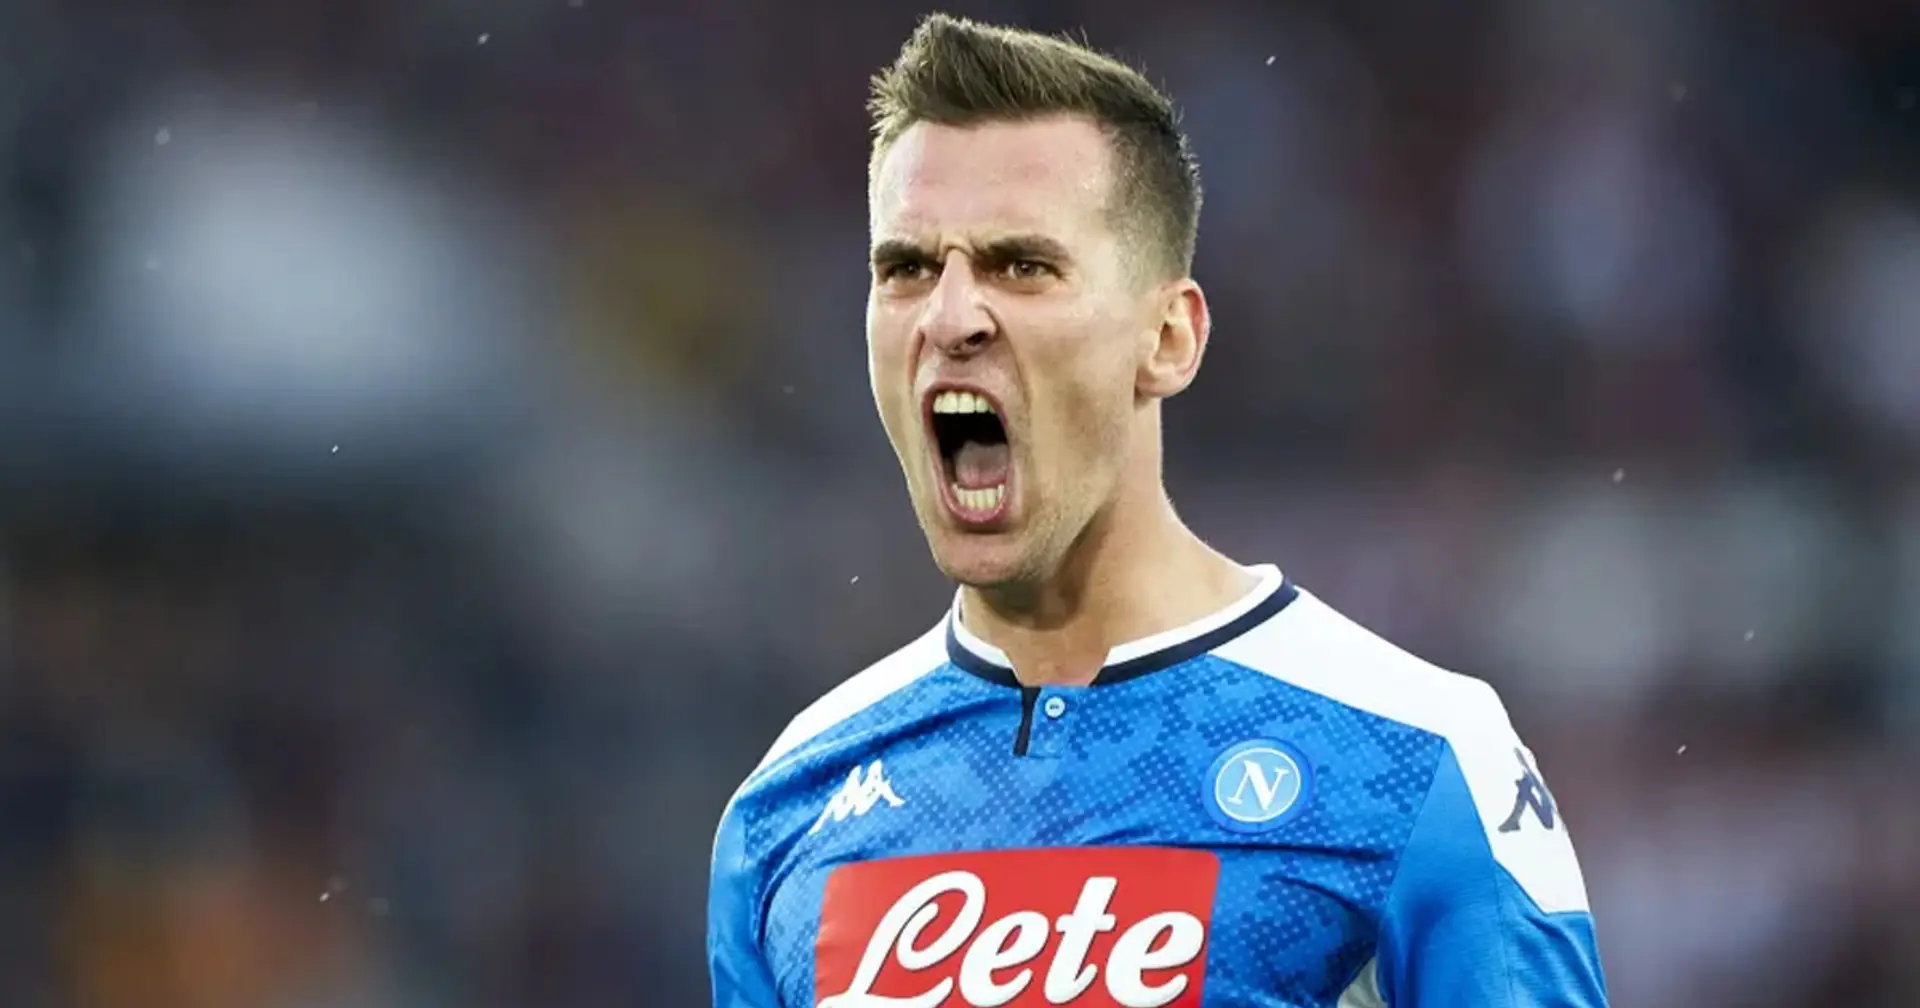 Chelsea 'ask for information' about availability of Napoli striker Arkaduisz Milik as Blues look to beat Tottenham in race for Polish hitman